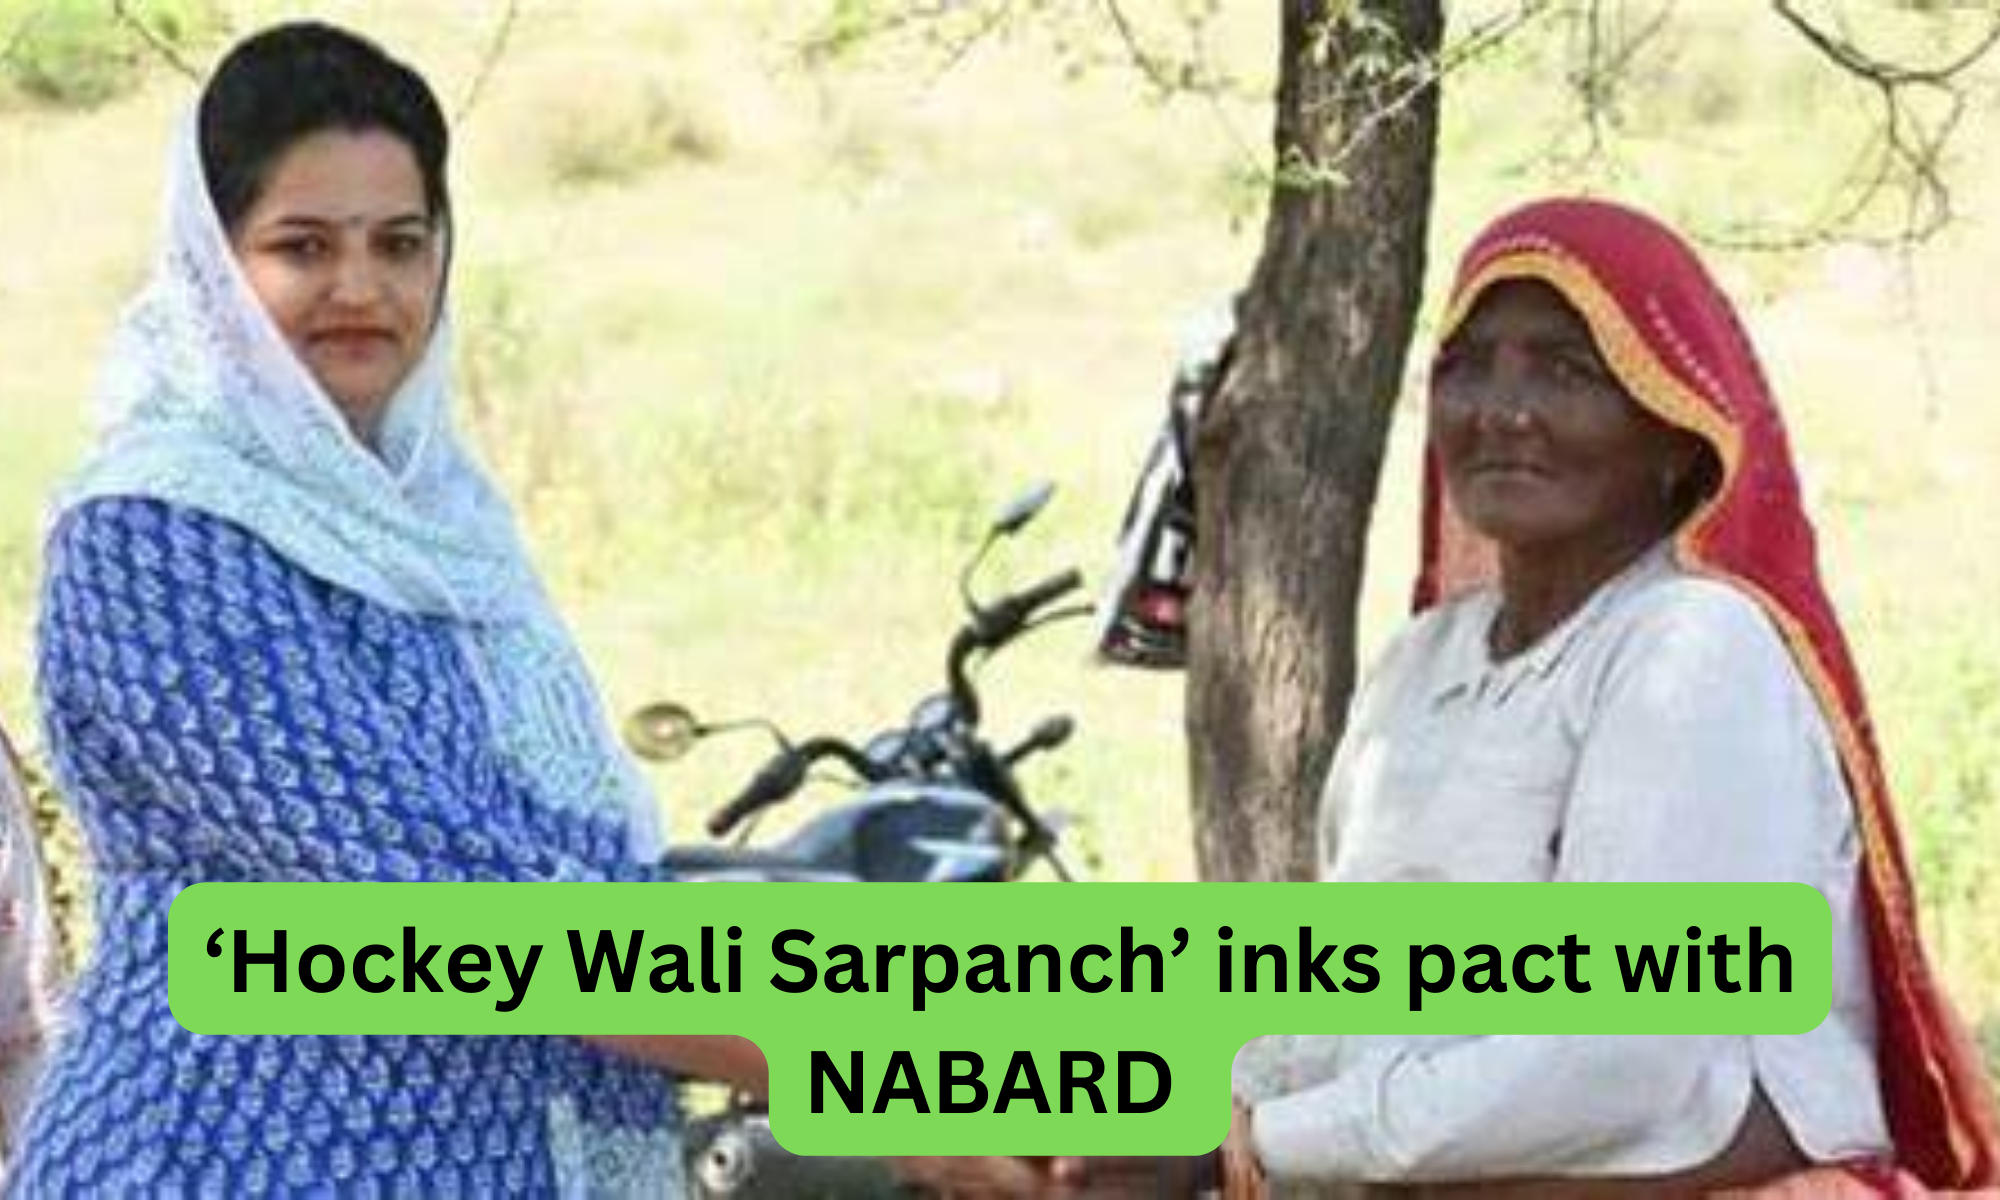 'Hockey Wali Sarpanch' inks pact with NABARD to strengthen farmers in Rajasthan's village_40.1